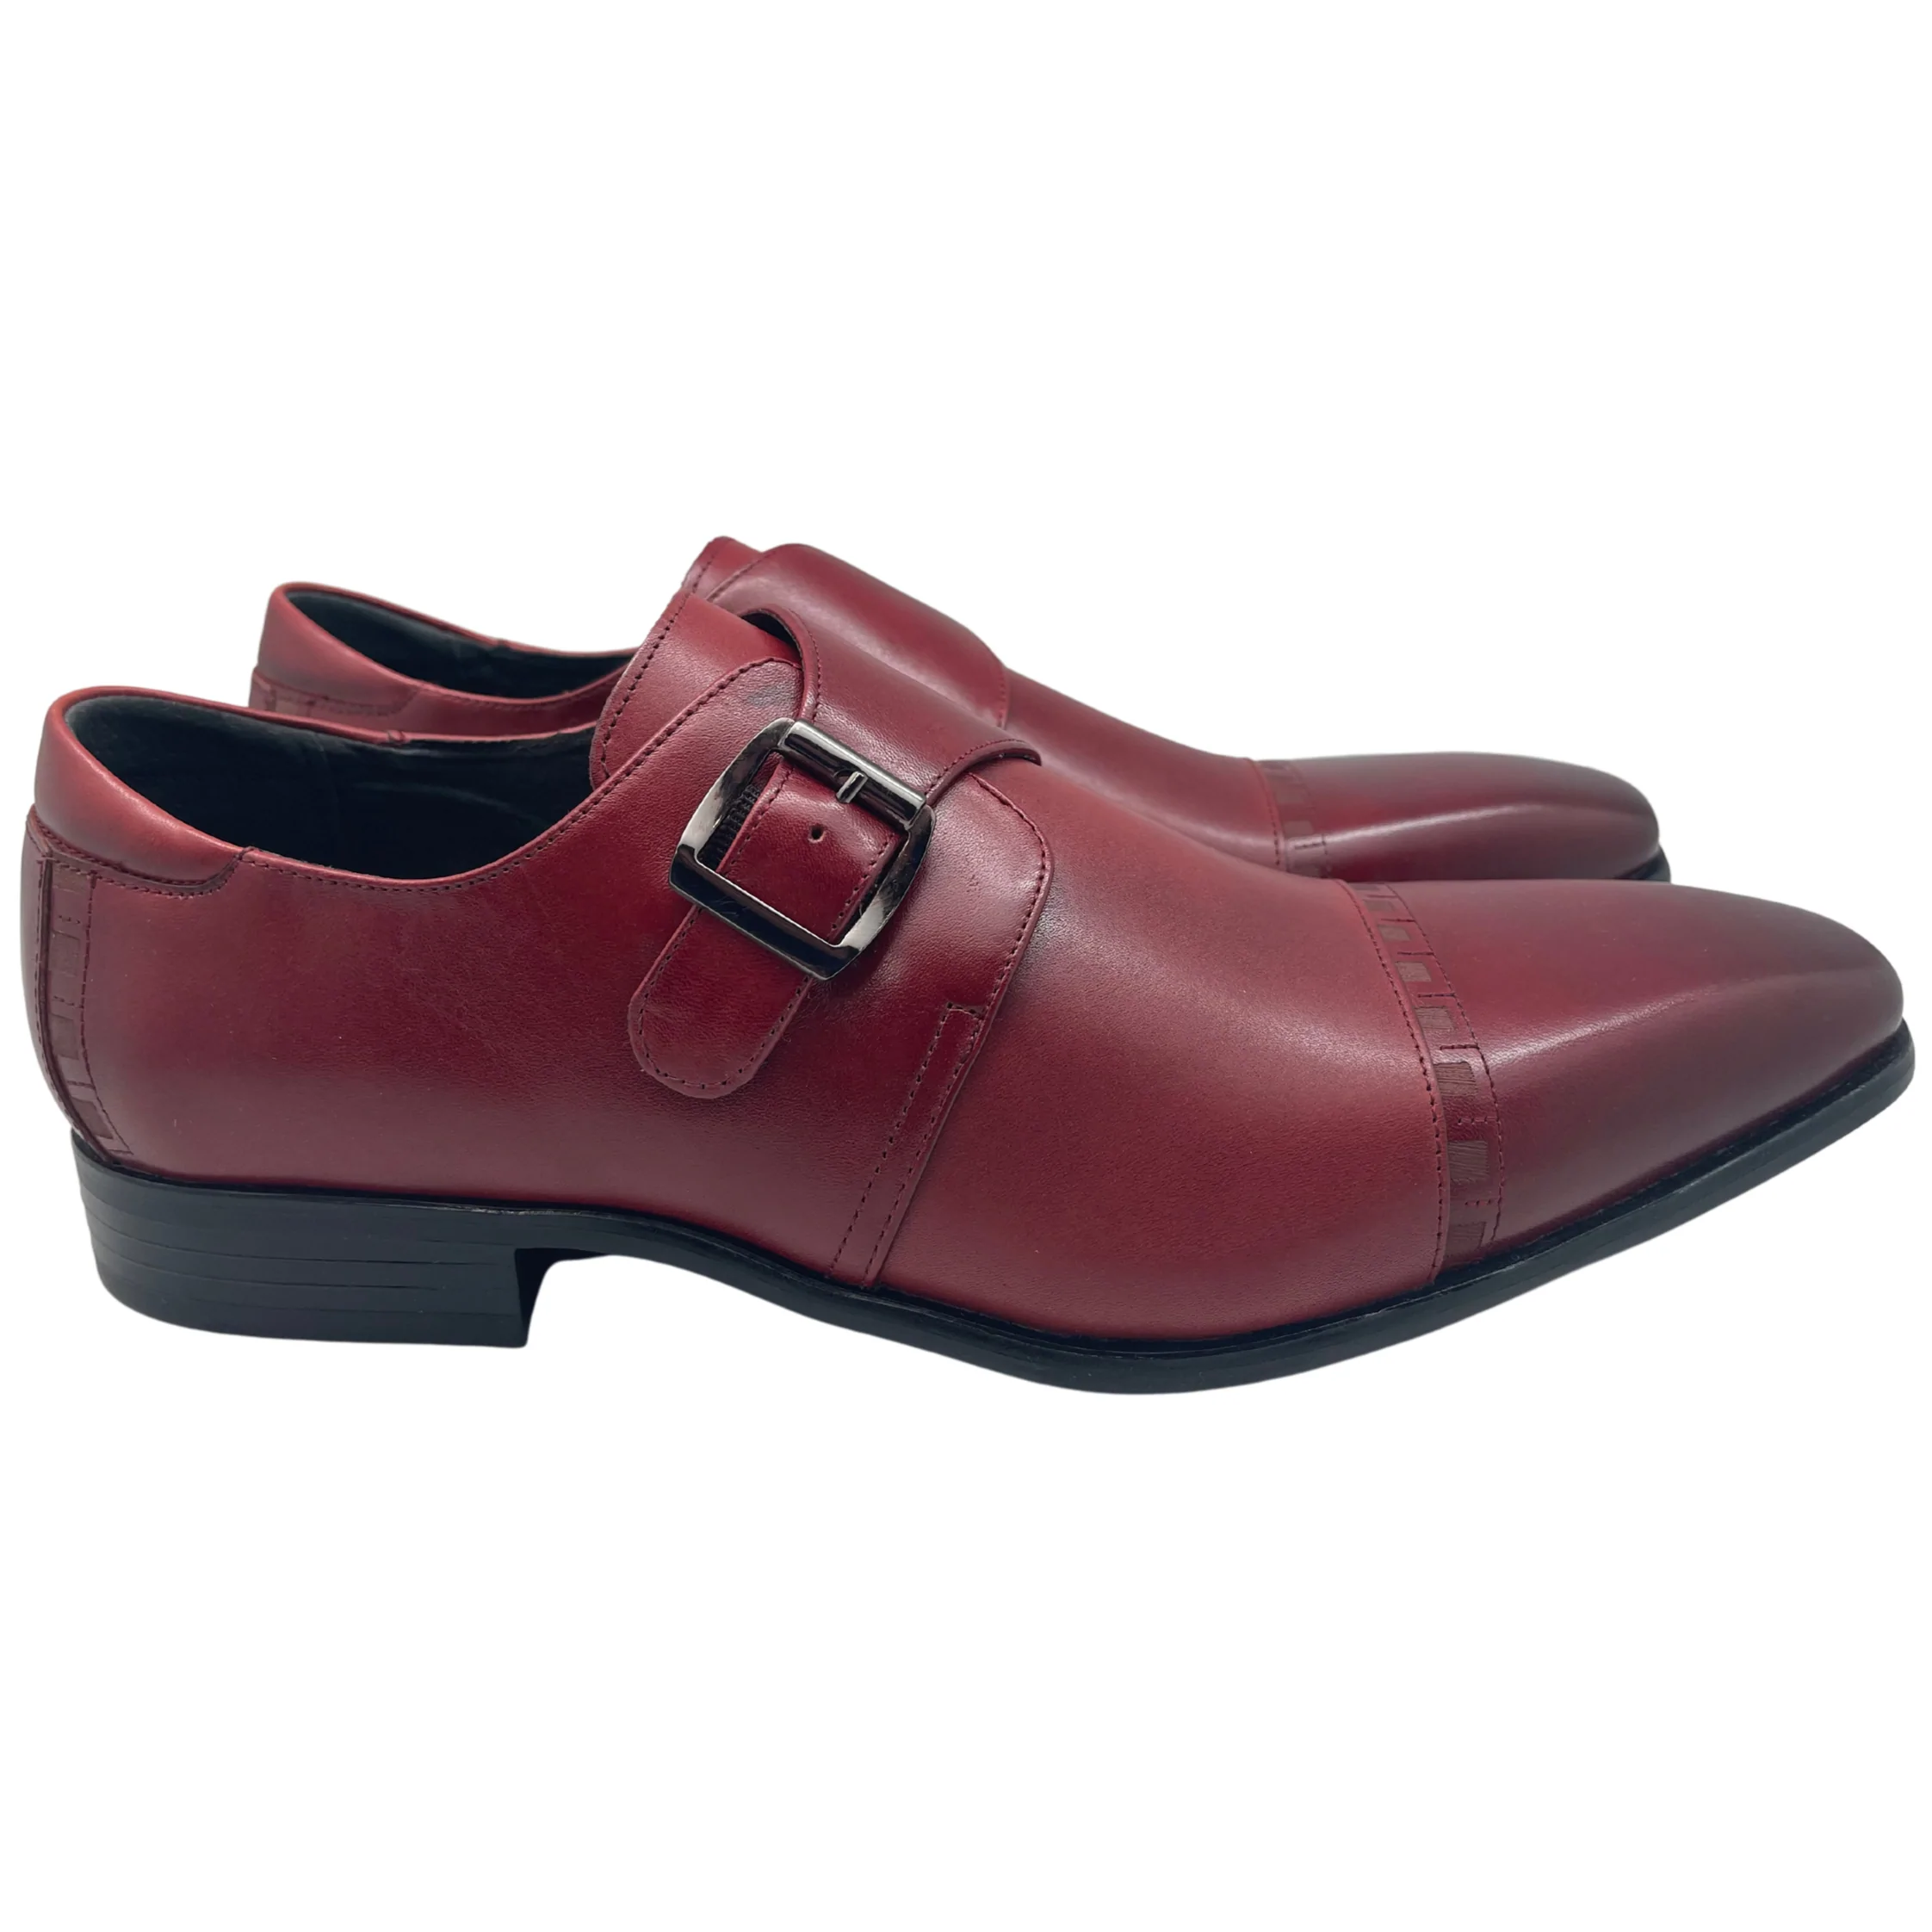 Stacy Adams Men's Dress Shoes / MacMillan / Red / Leather / Size 11